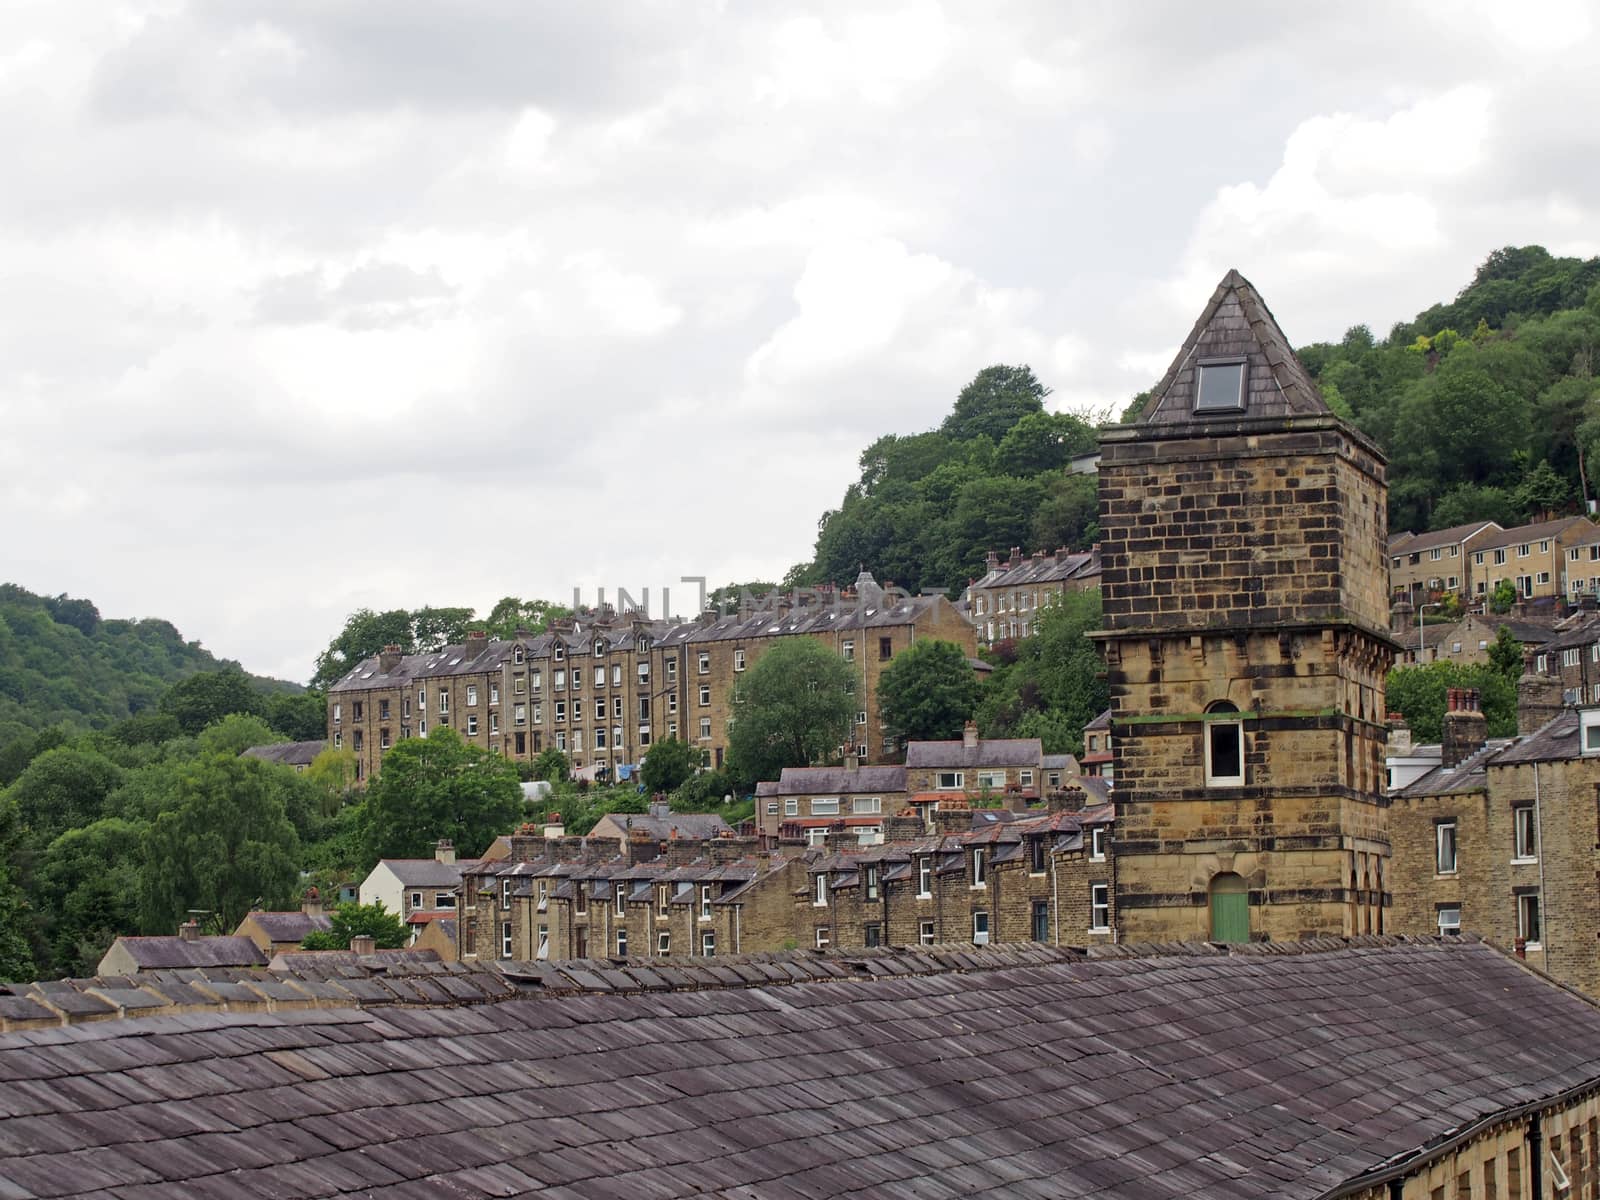 a view of the steep hillside streets in hebden bridge between summer trees with the tower of the historic nutclough mill building at the front